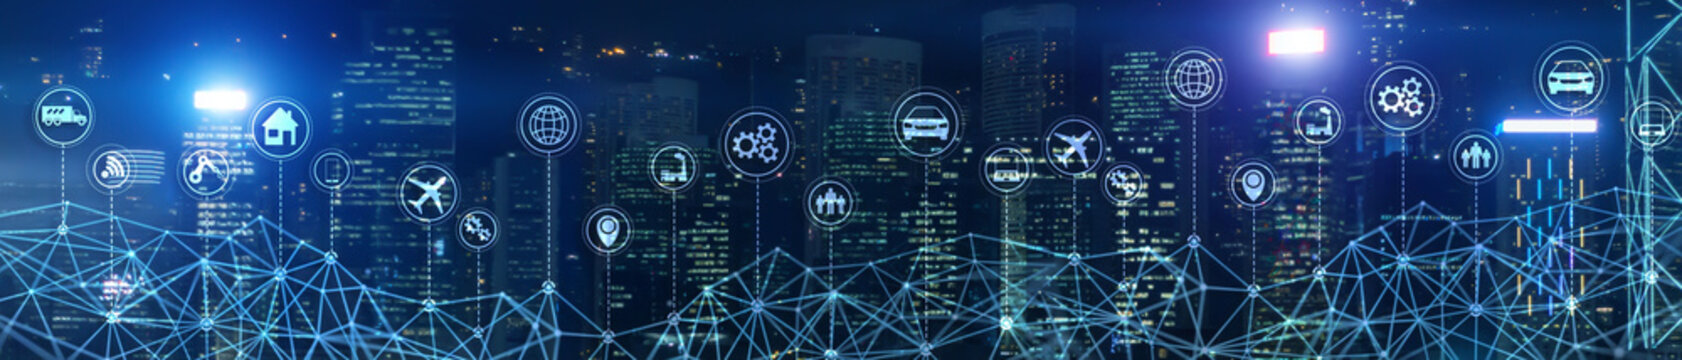 Smart City IOT Concept. Wallpaper for your site. Panoramic Business Banner.